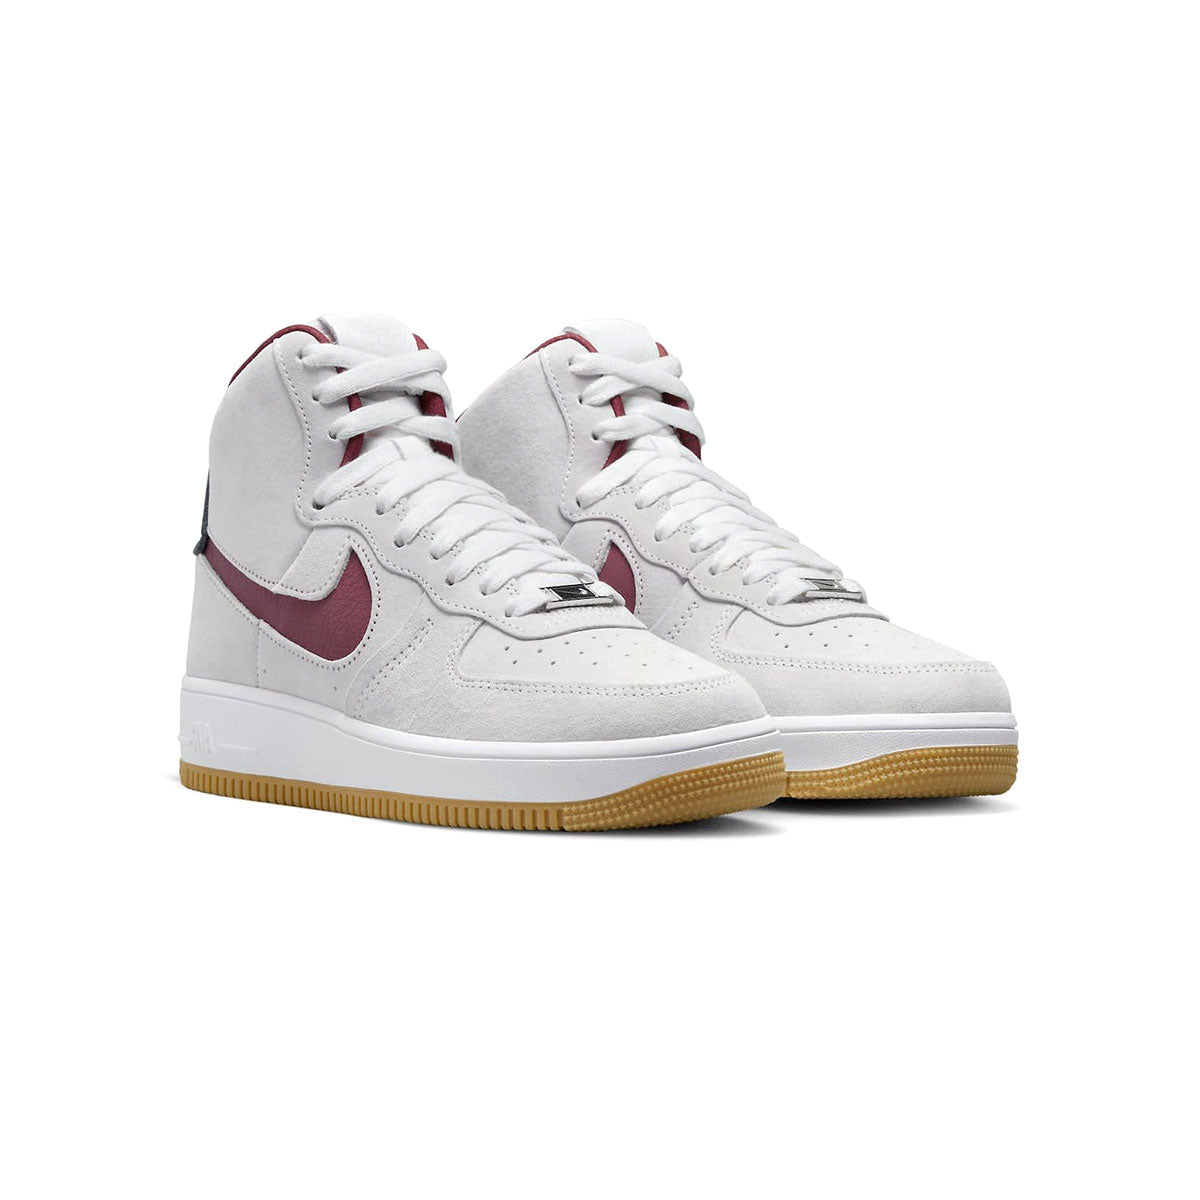 Nike Women's Air Force 1 High Suede